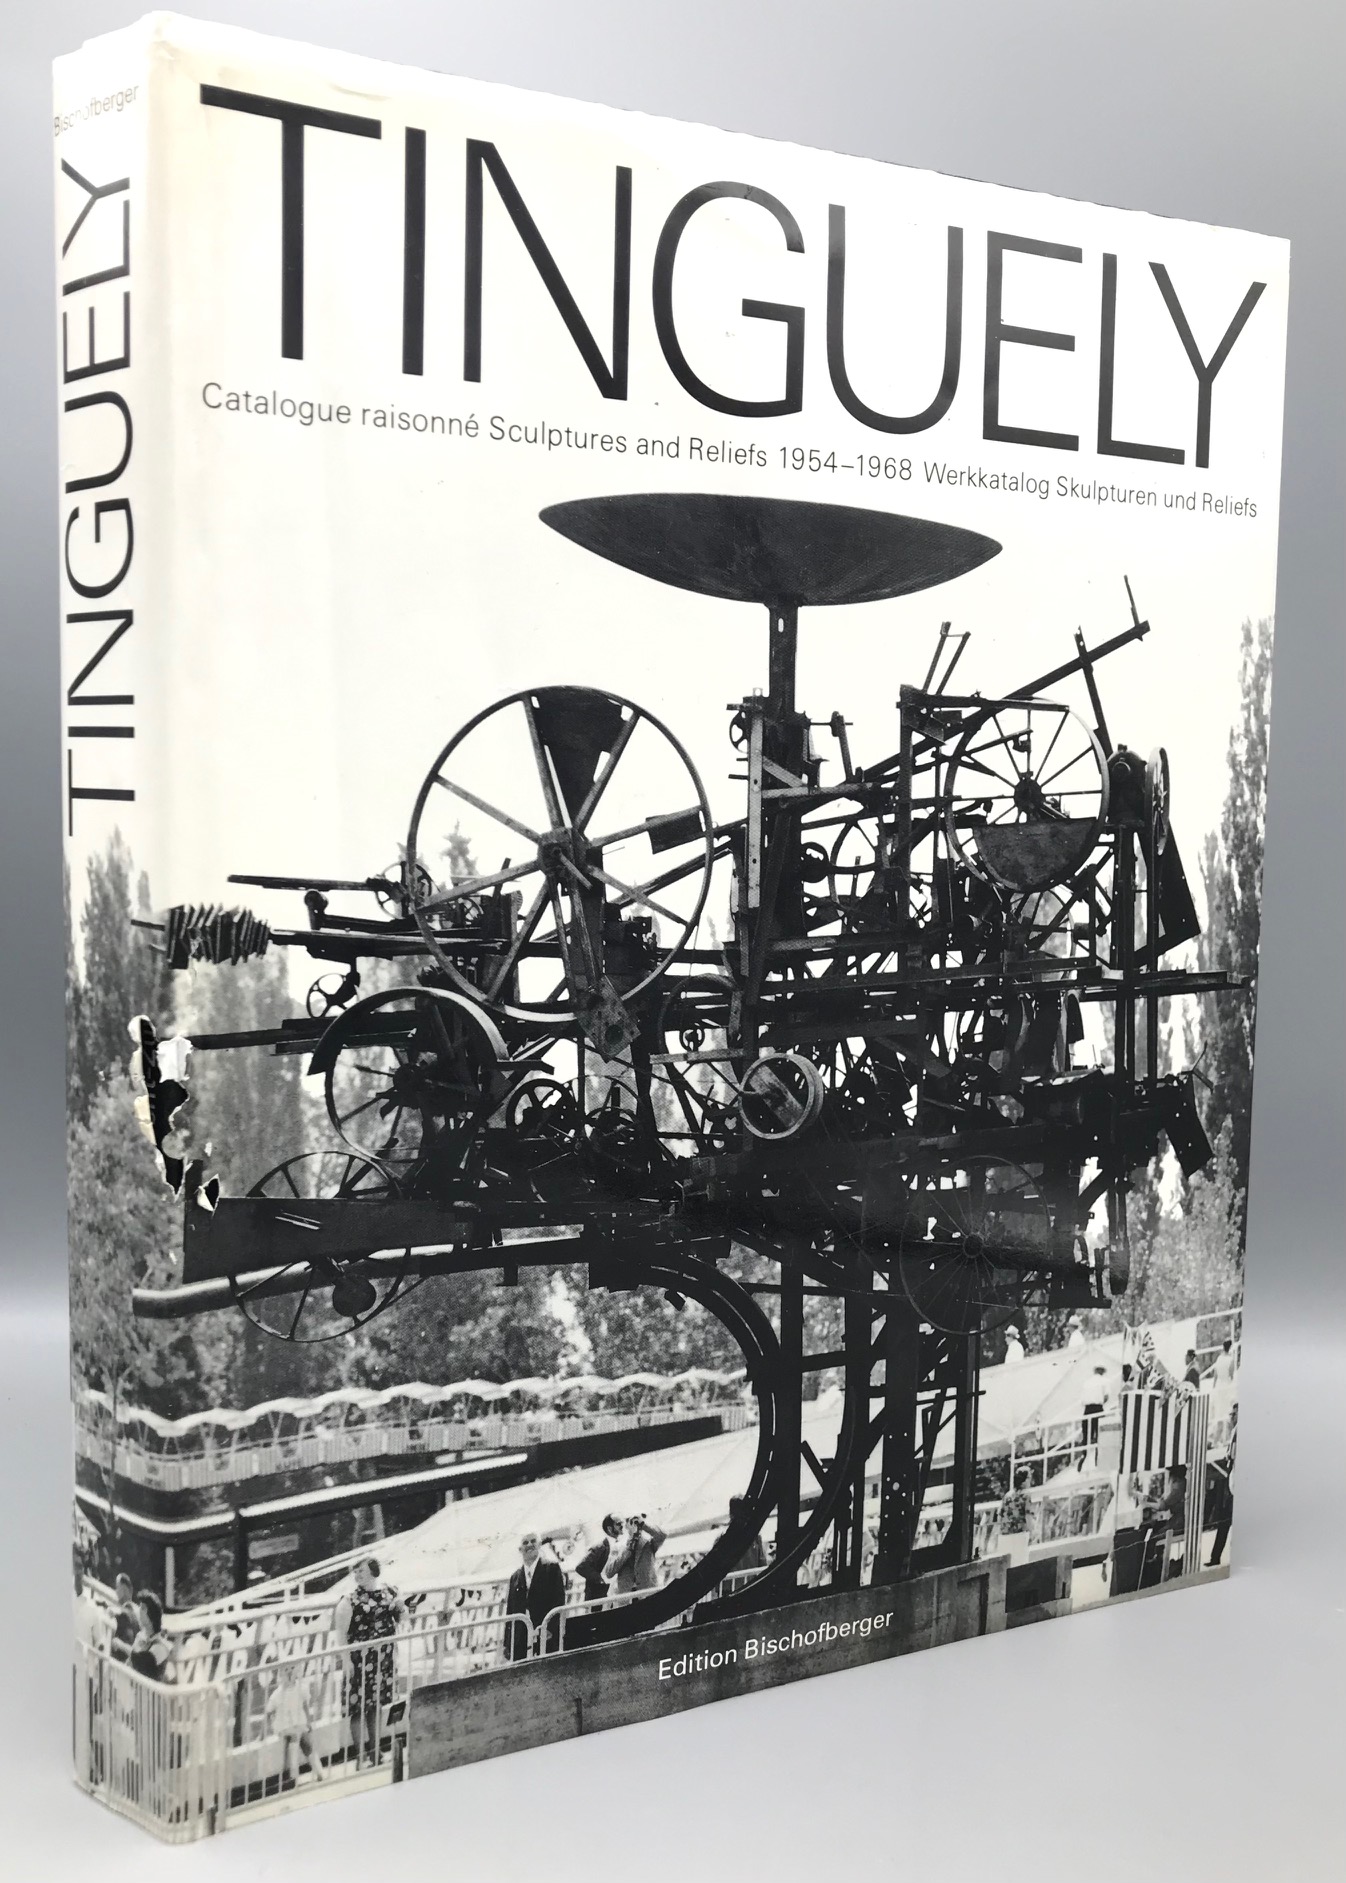 JEAN TINGUELY: SCULPTURE AND RELIEFS 1954-1968, ed Christina Bischofberger - 1982 [1st Ed.]